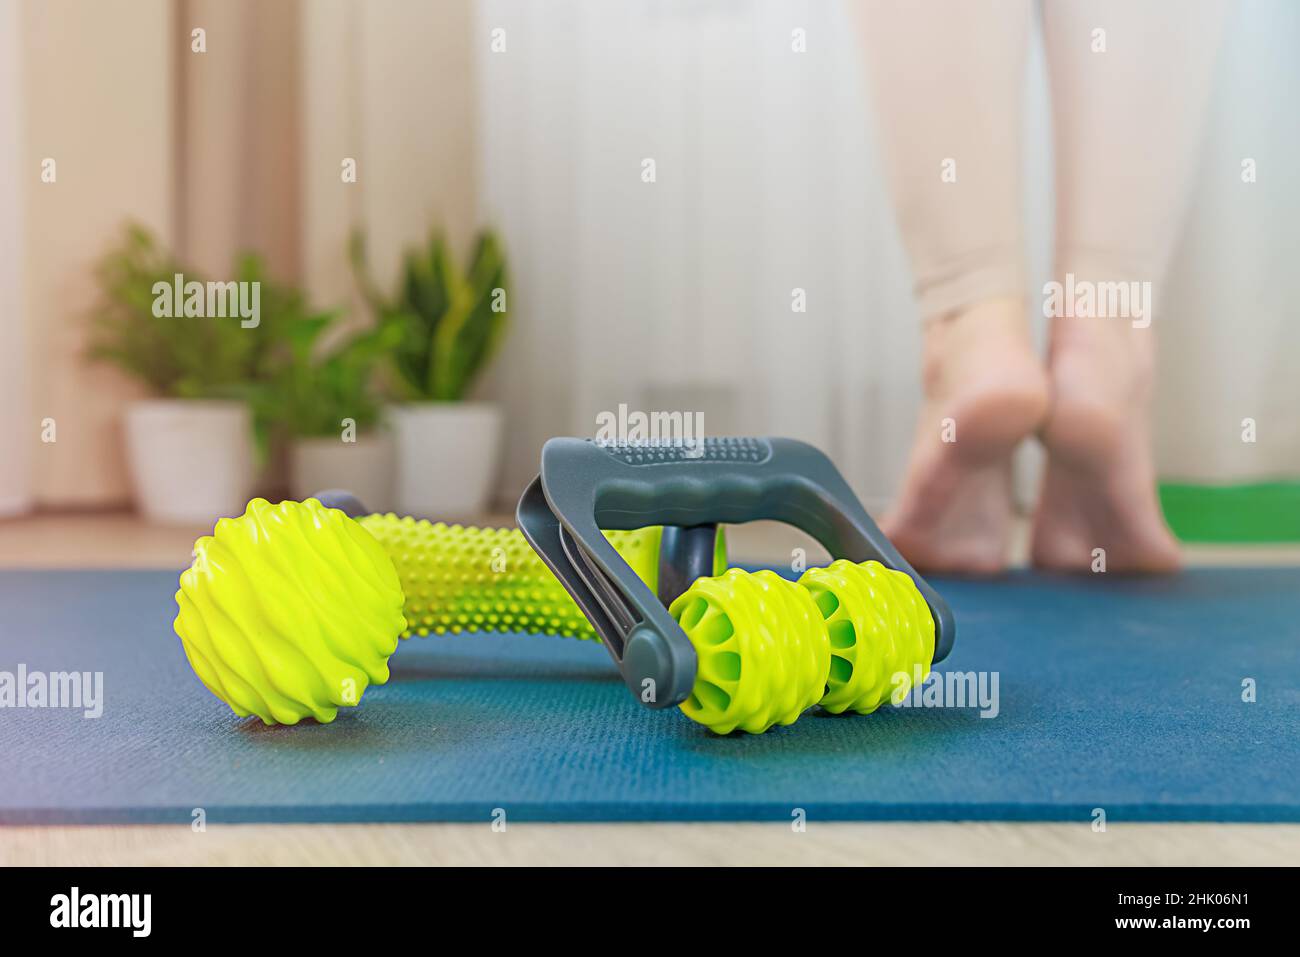 set for myofascial foot massage at home Stock Photo